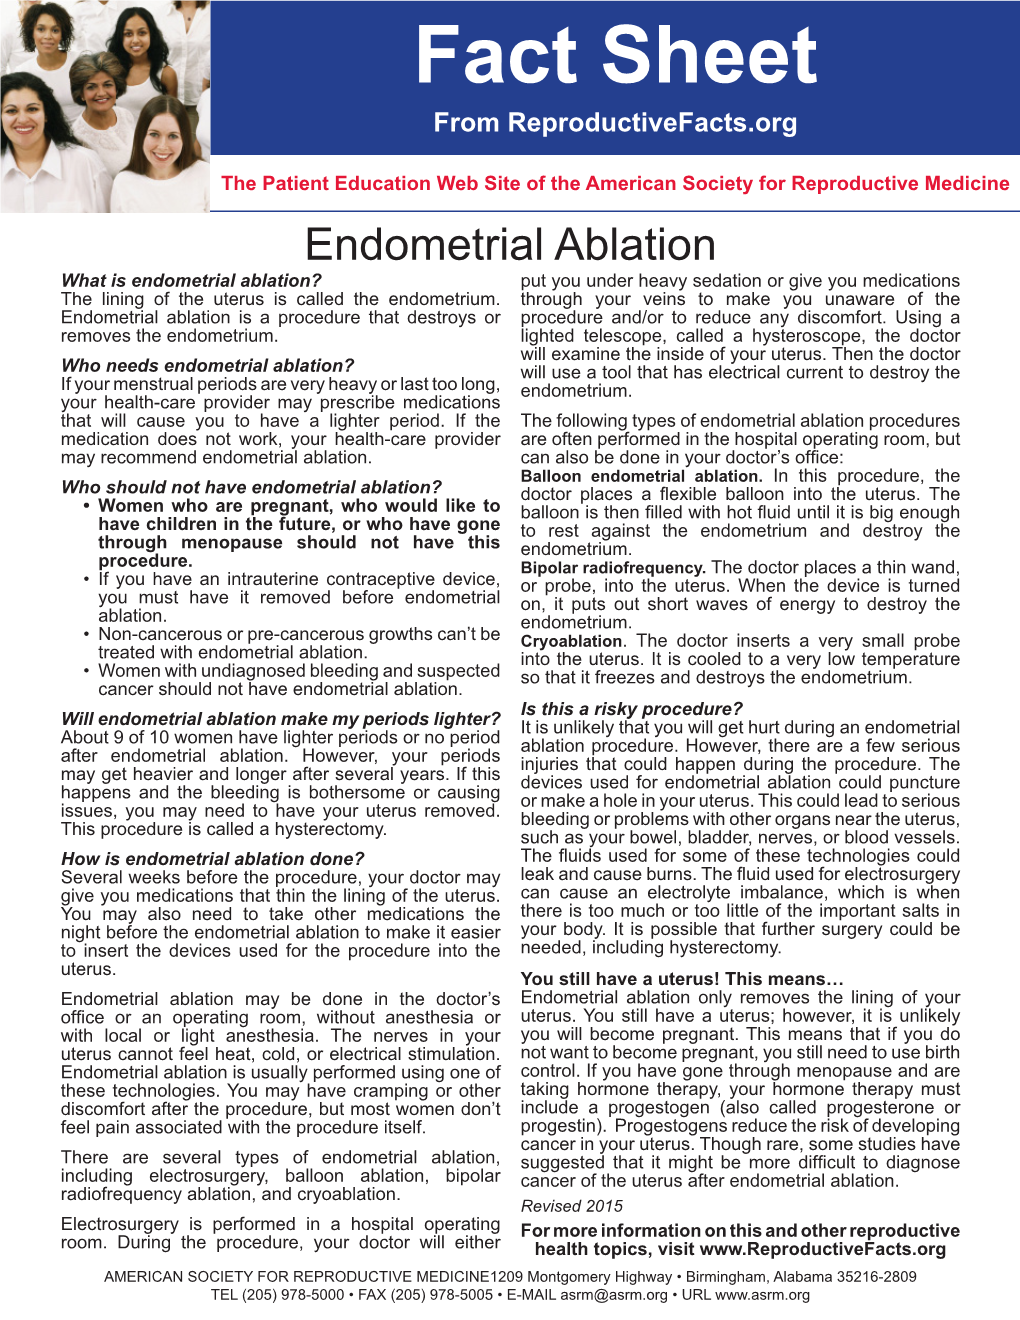 Endometrial Ablation What Is Endometrial Ablation? Put You Under Heavy Sedation Or Give You Medications the Lining of the Uterus Is Called the Endometrium